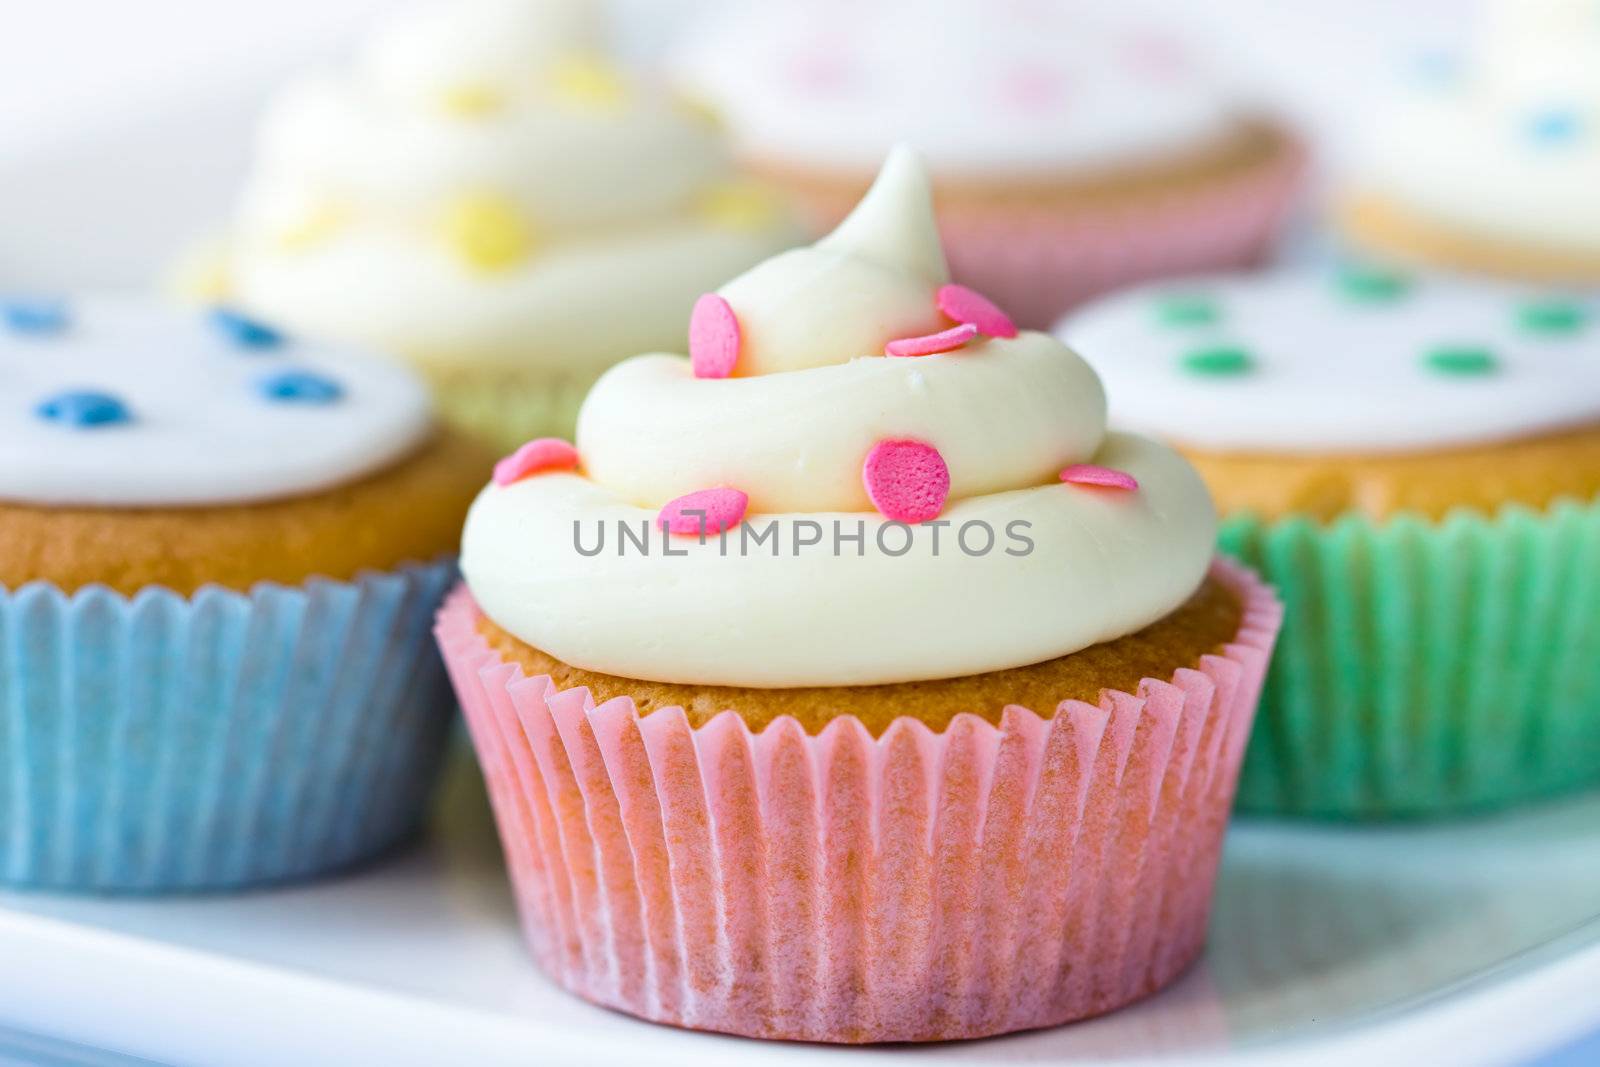 Selection of colorful cupcakes on a plate